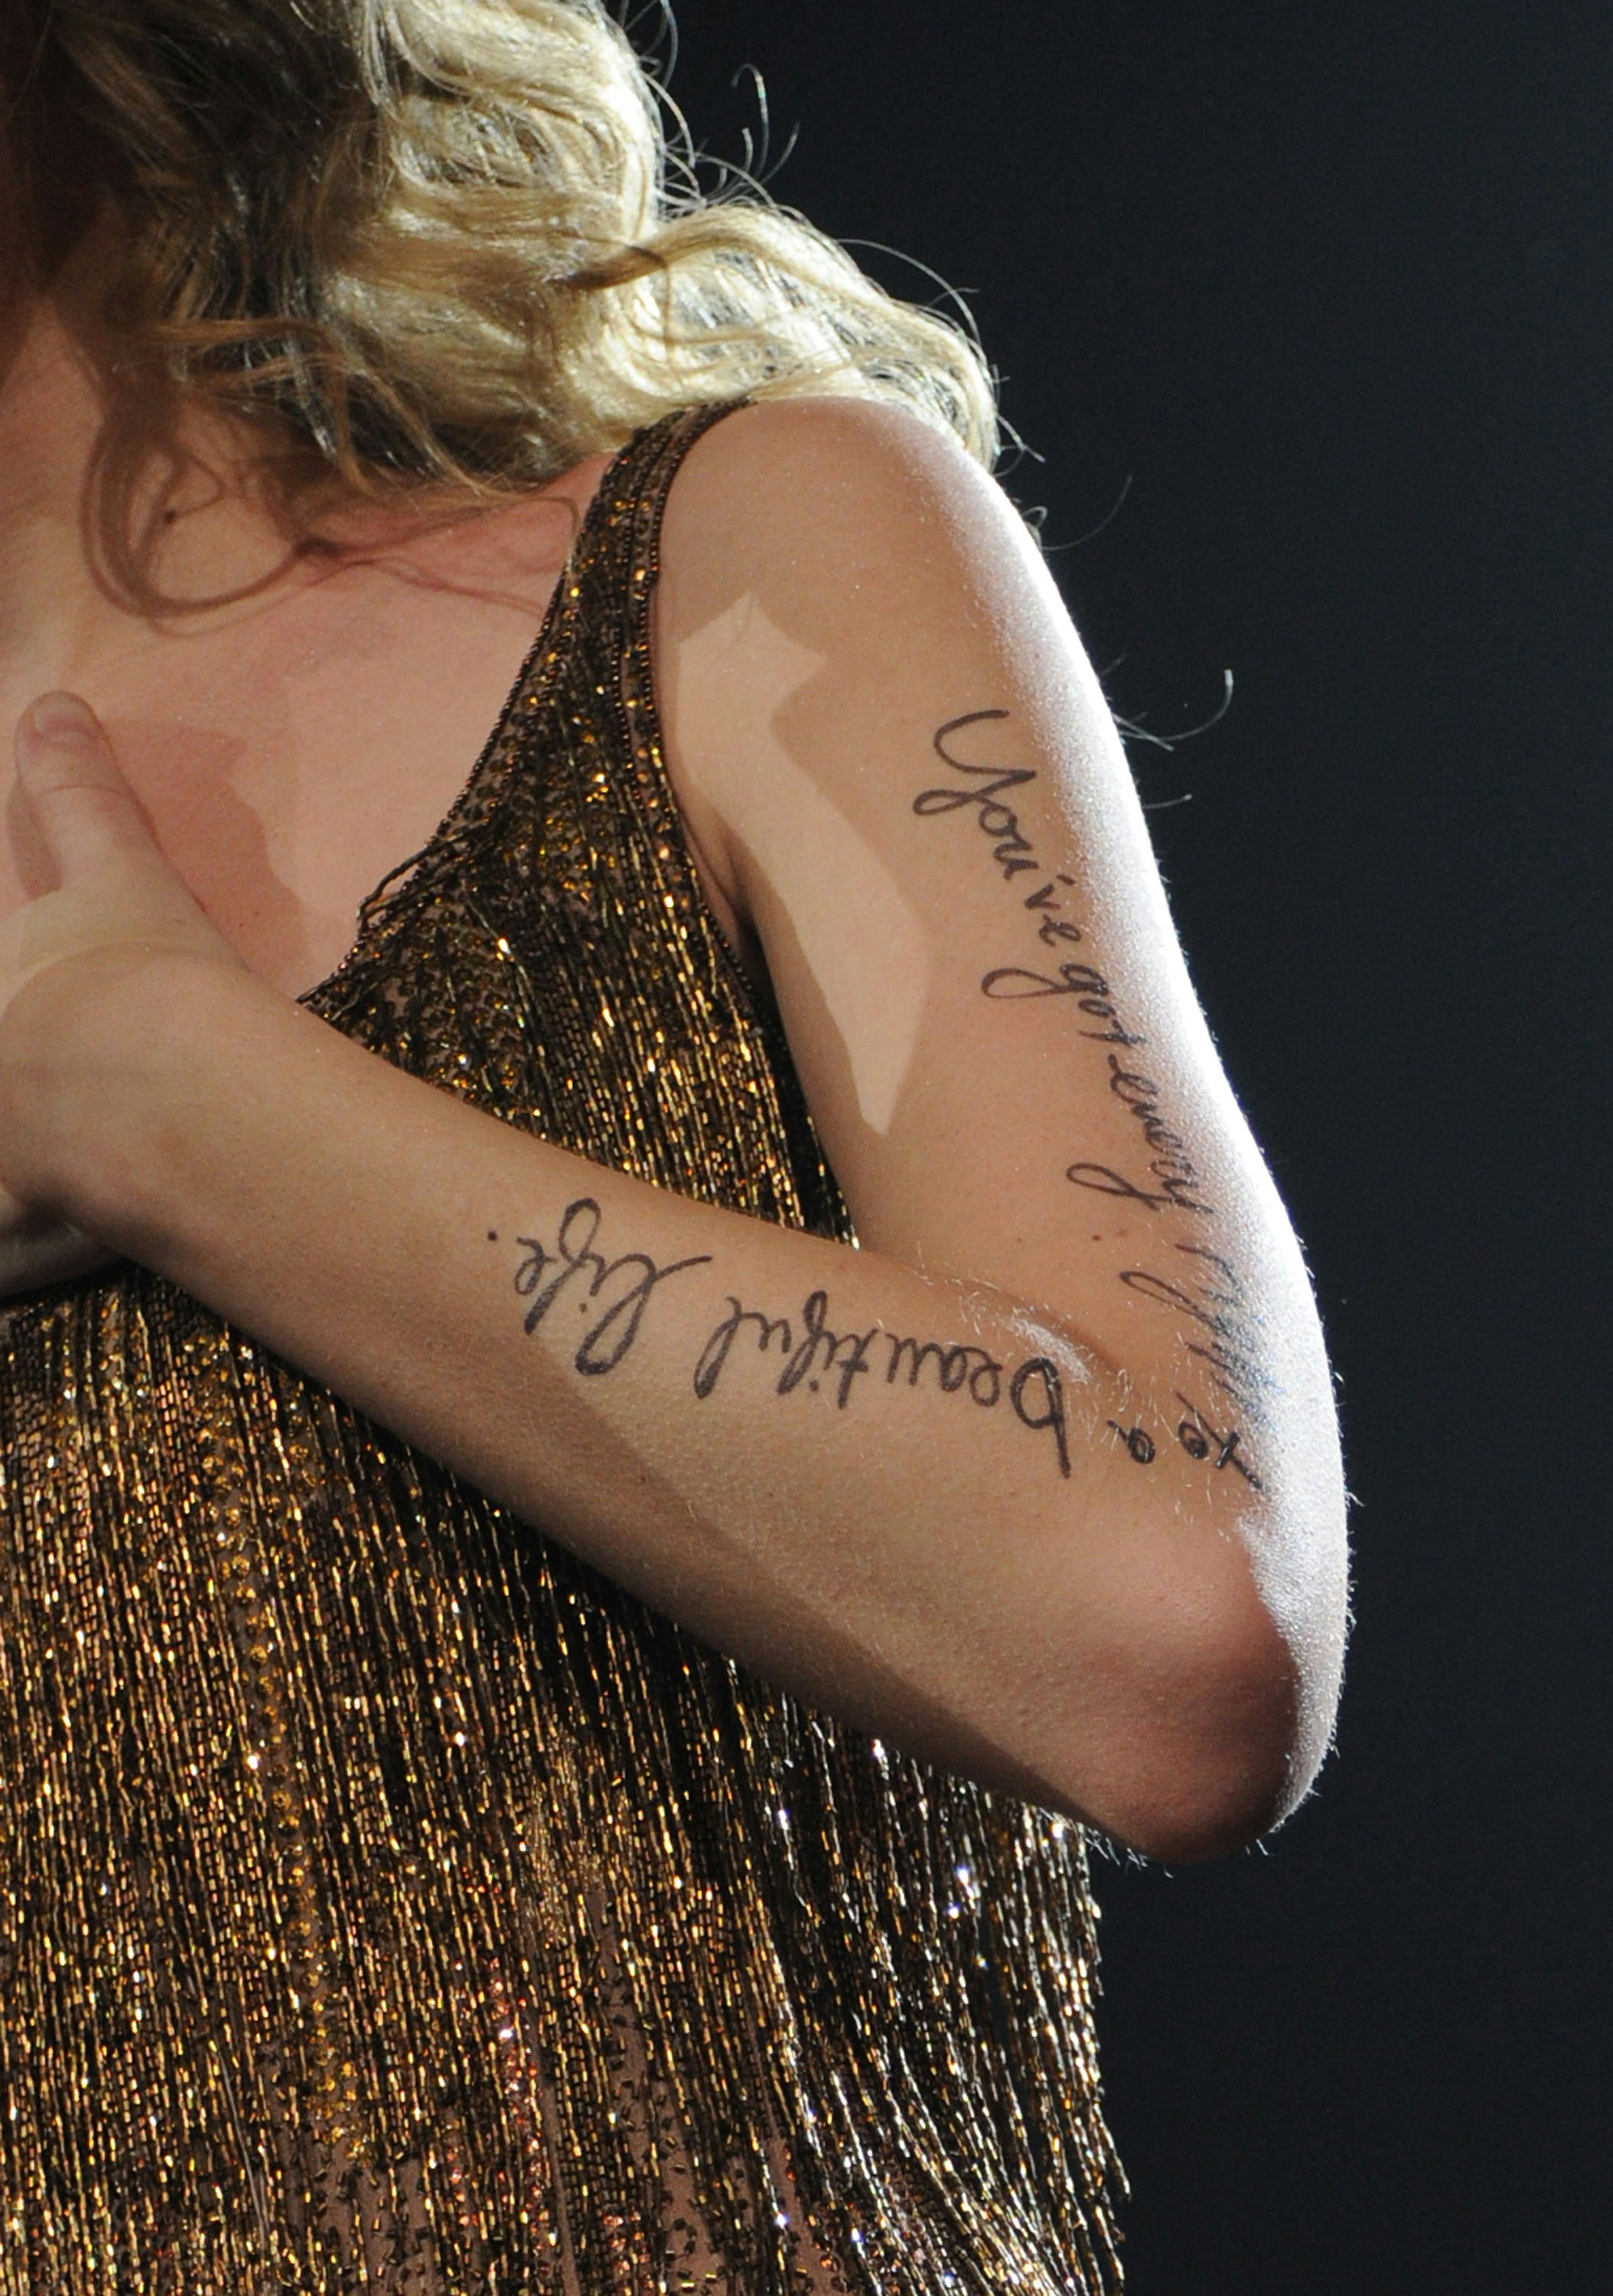 Taylor Swift Tattoo On Arm What Does It Say